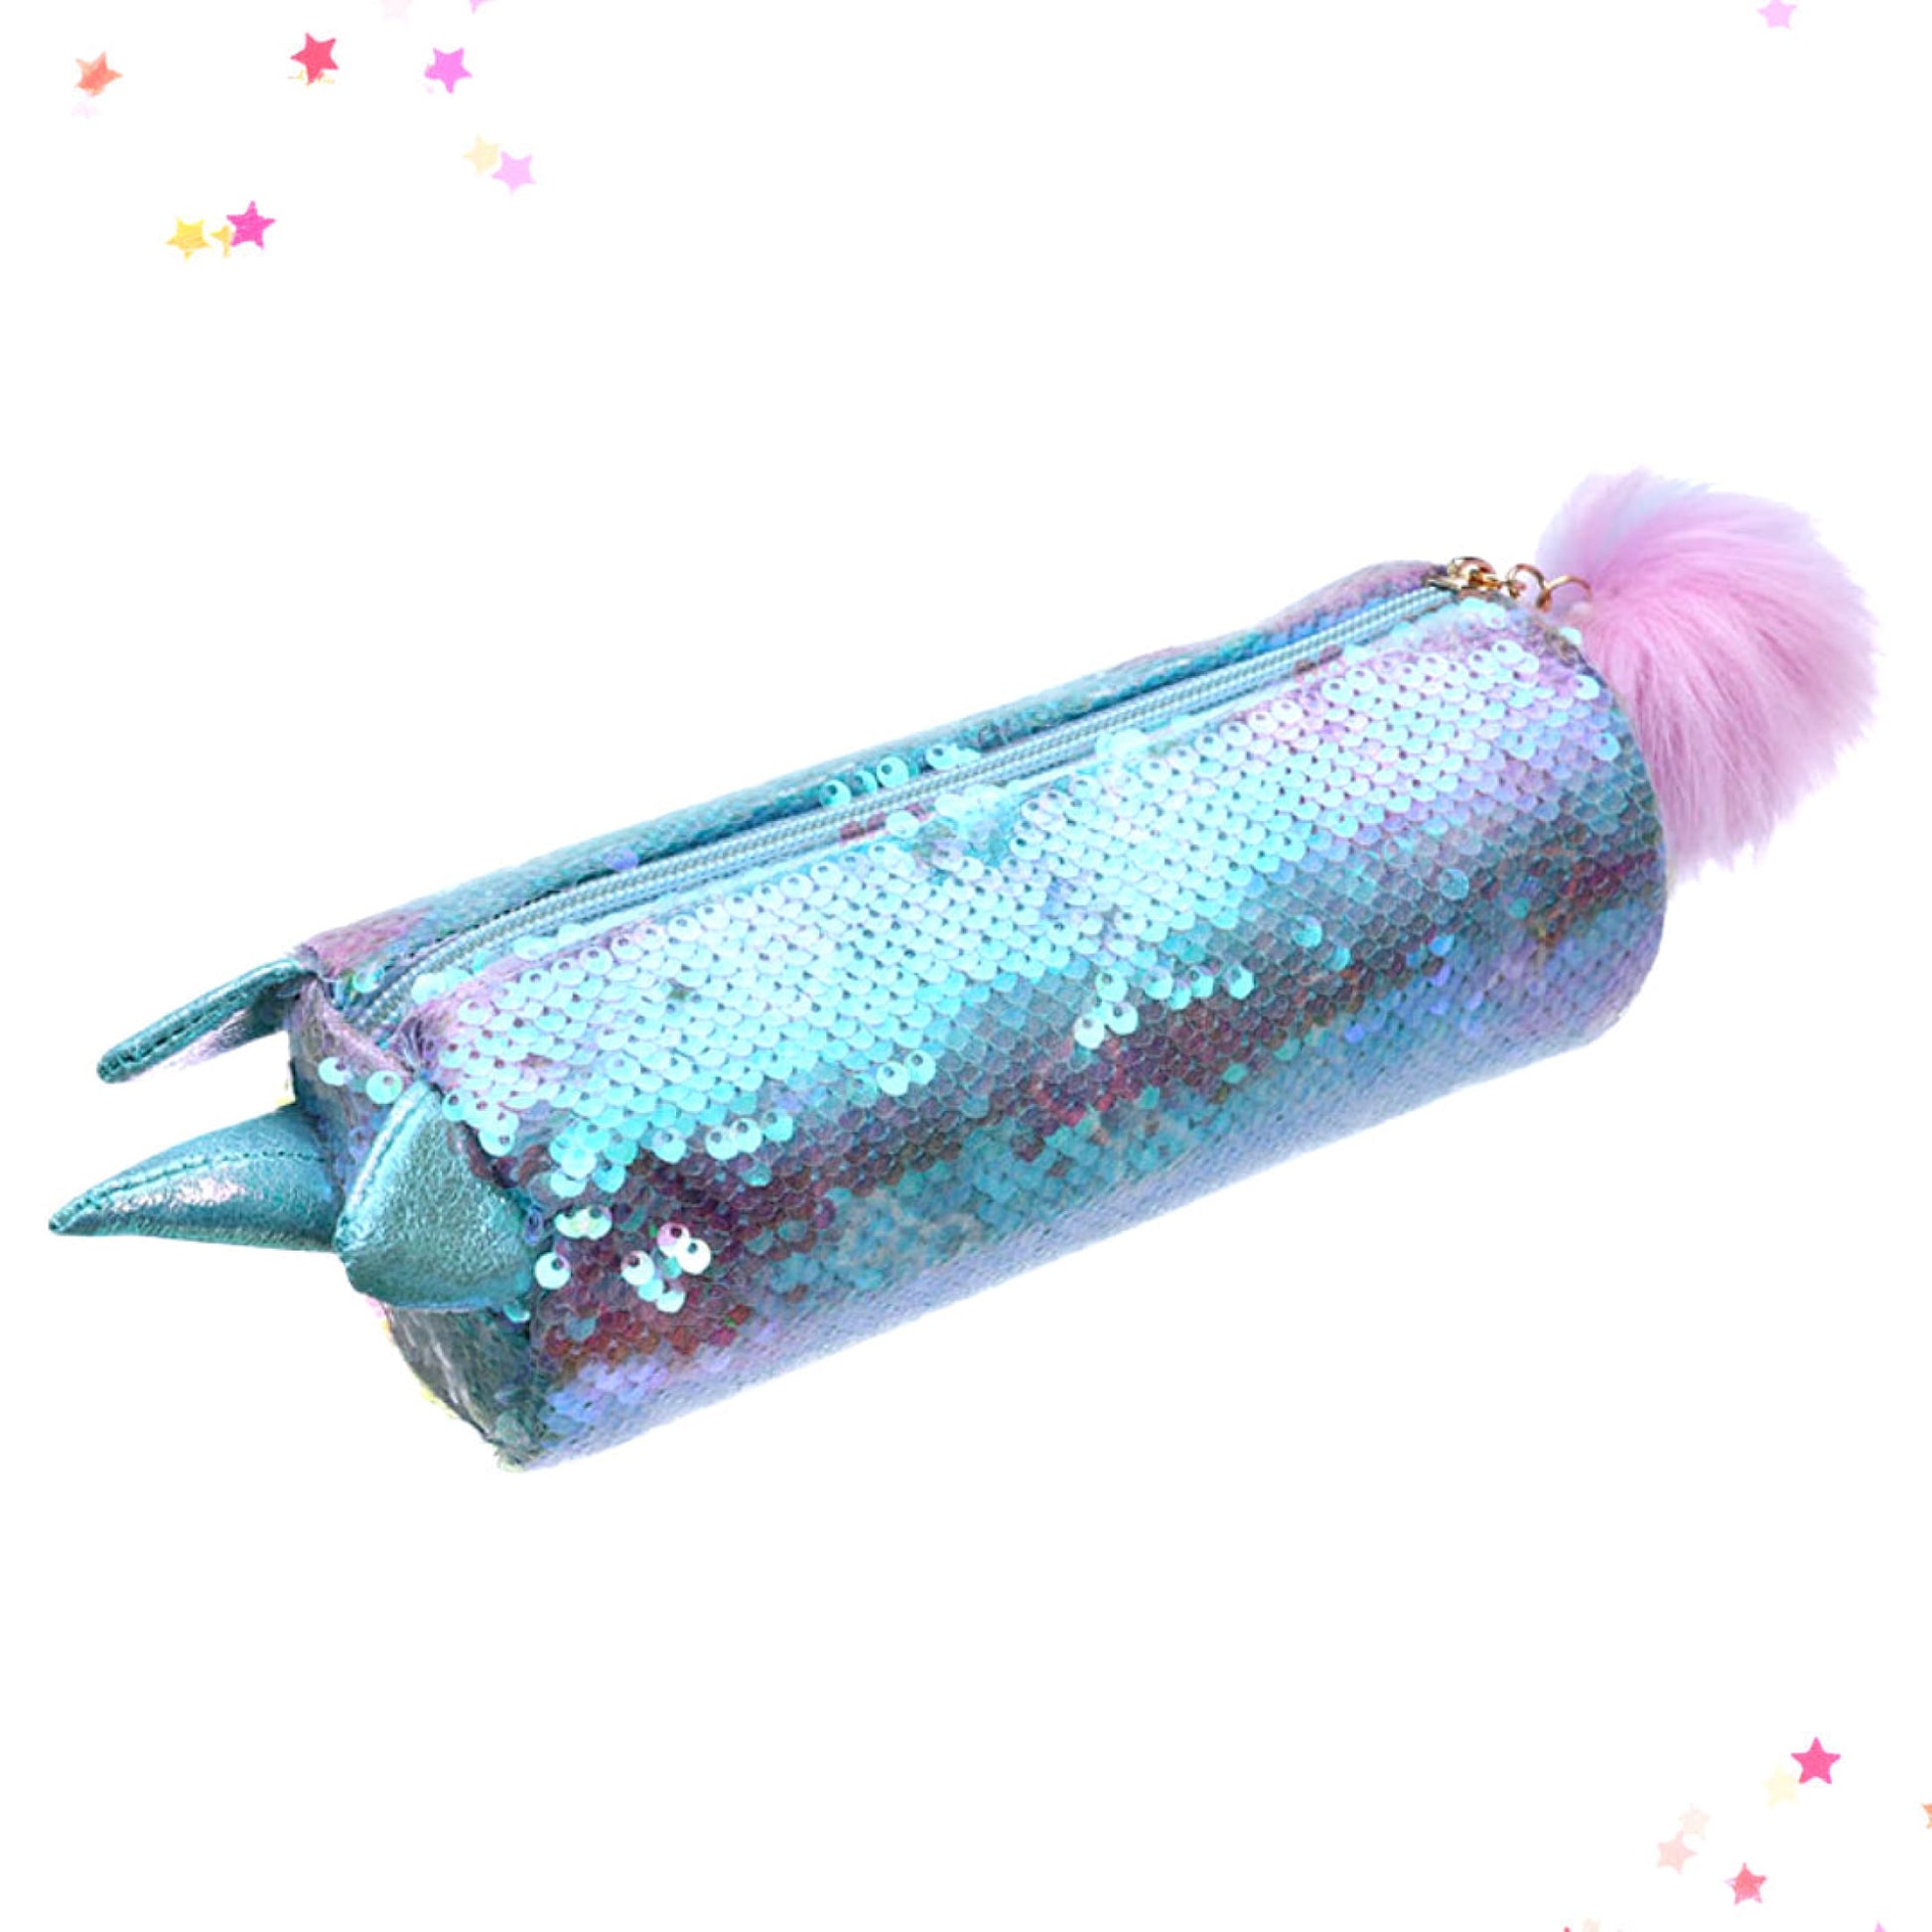 Iridescent Sequin Unicorn Pencil Case in Mint from Confetti Kitty, Only 8.99